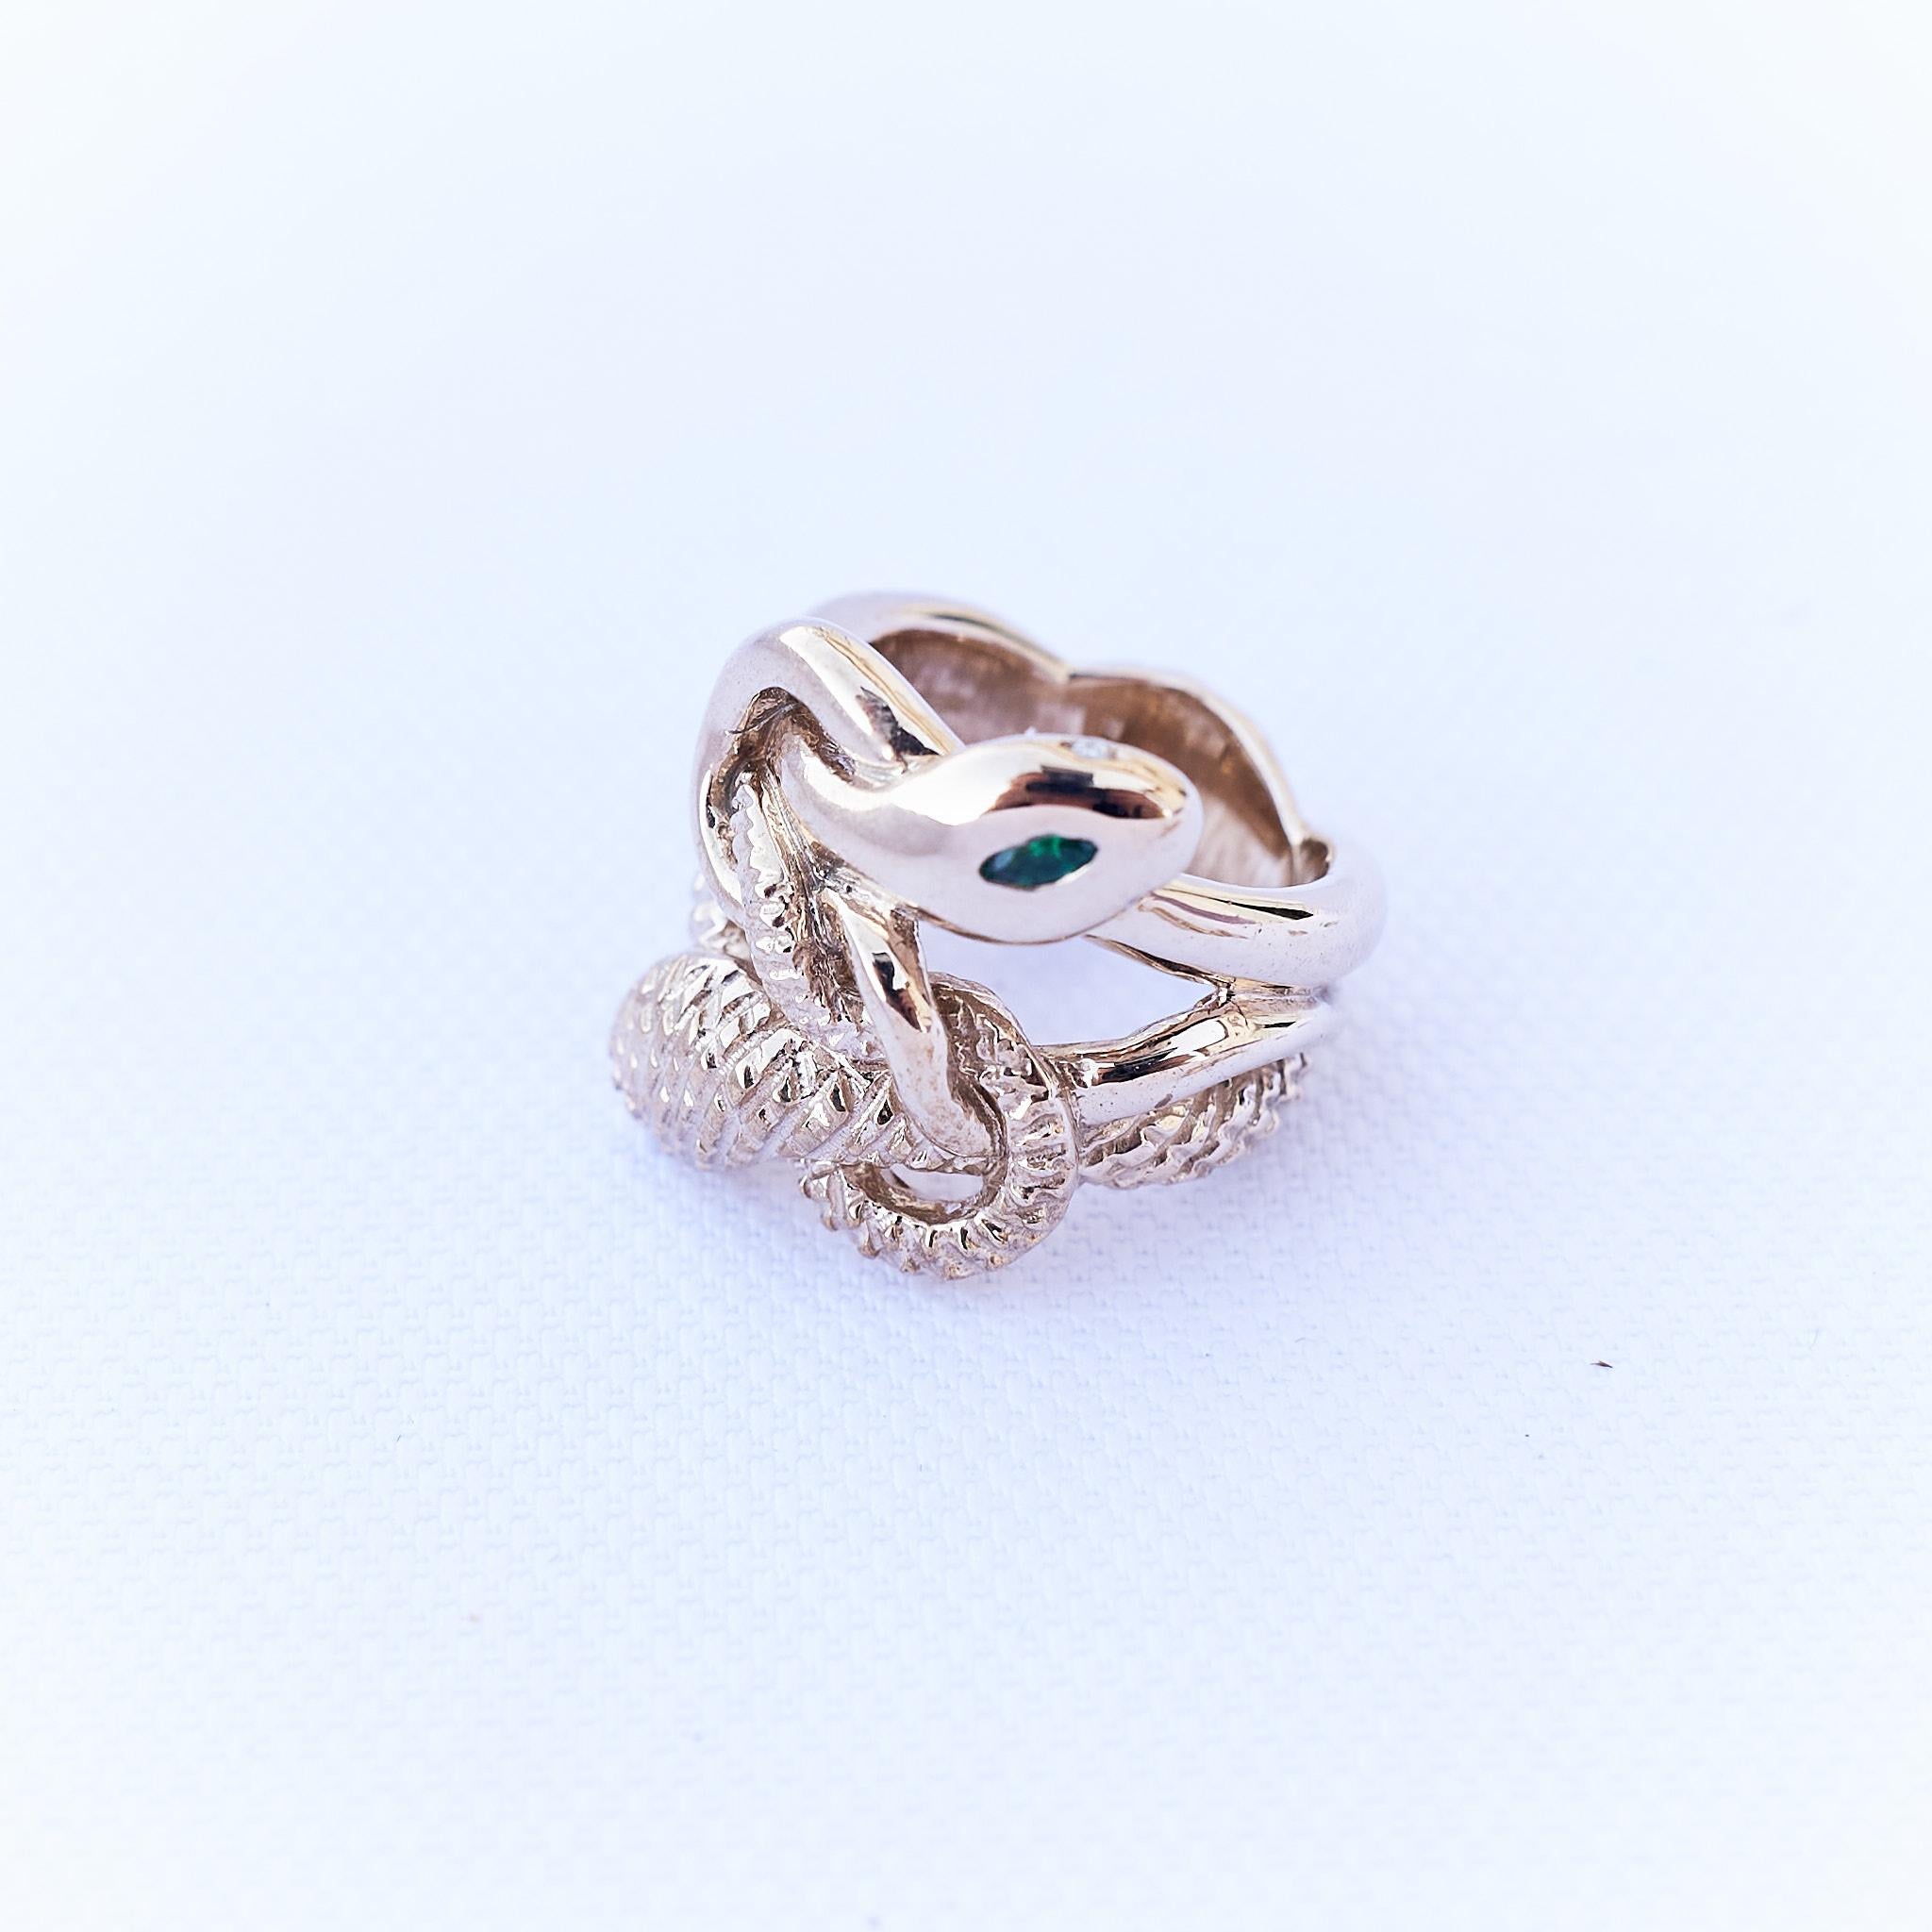 Marquise Cut Emerald White Diamond Ruby Double Head Snake Ring Animal Jewelry J Dauphin For Sale